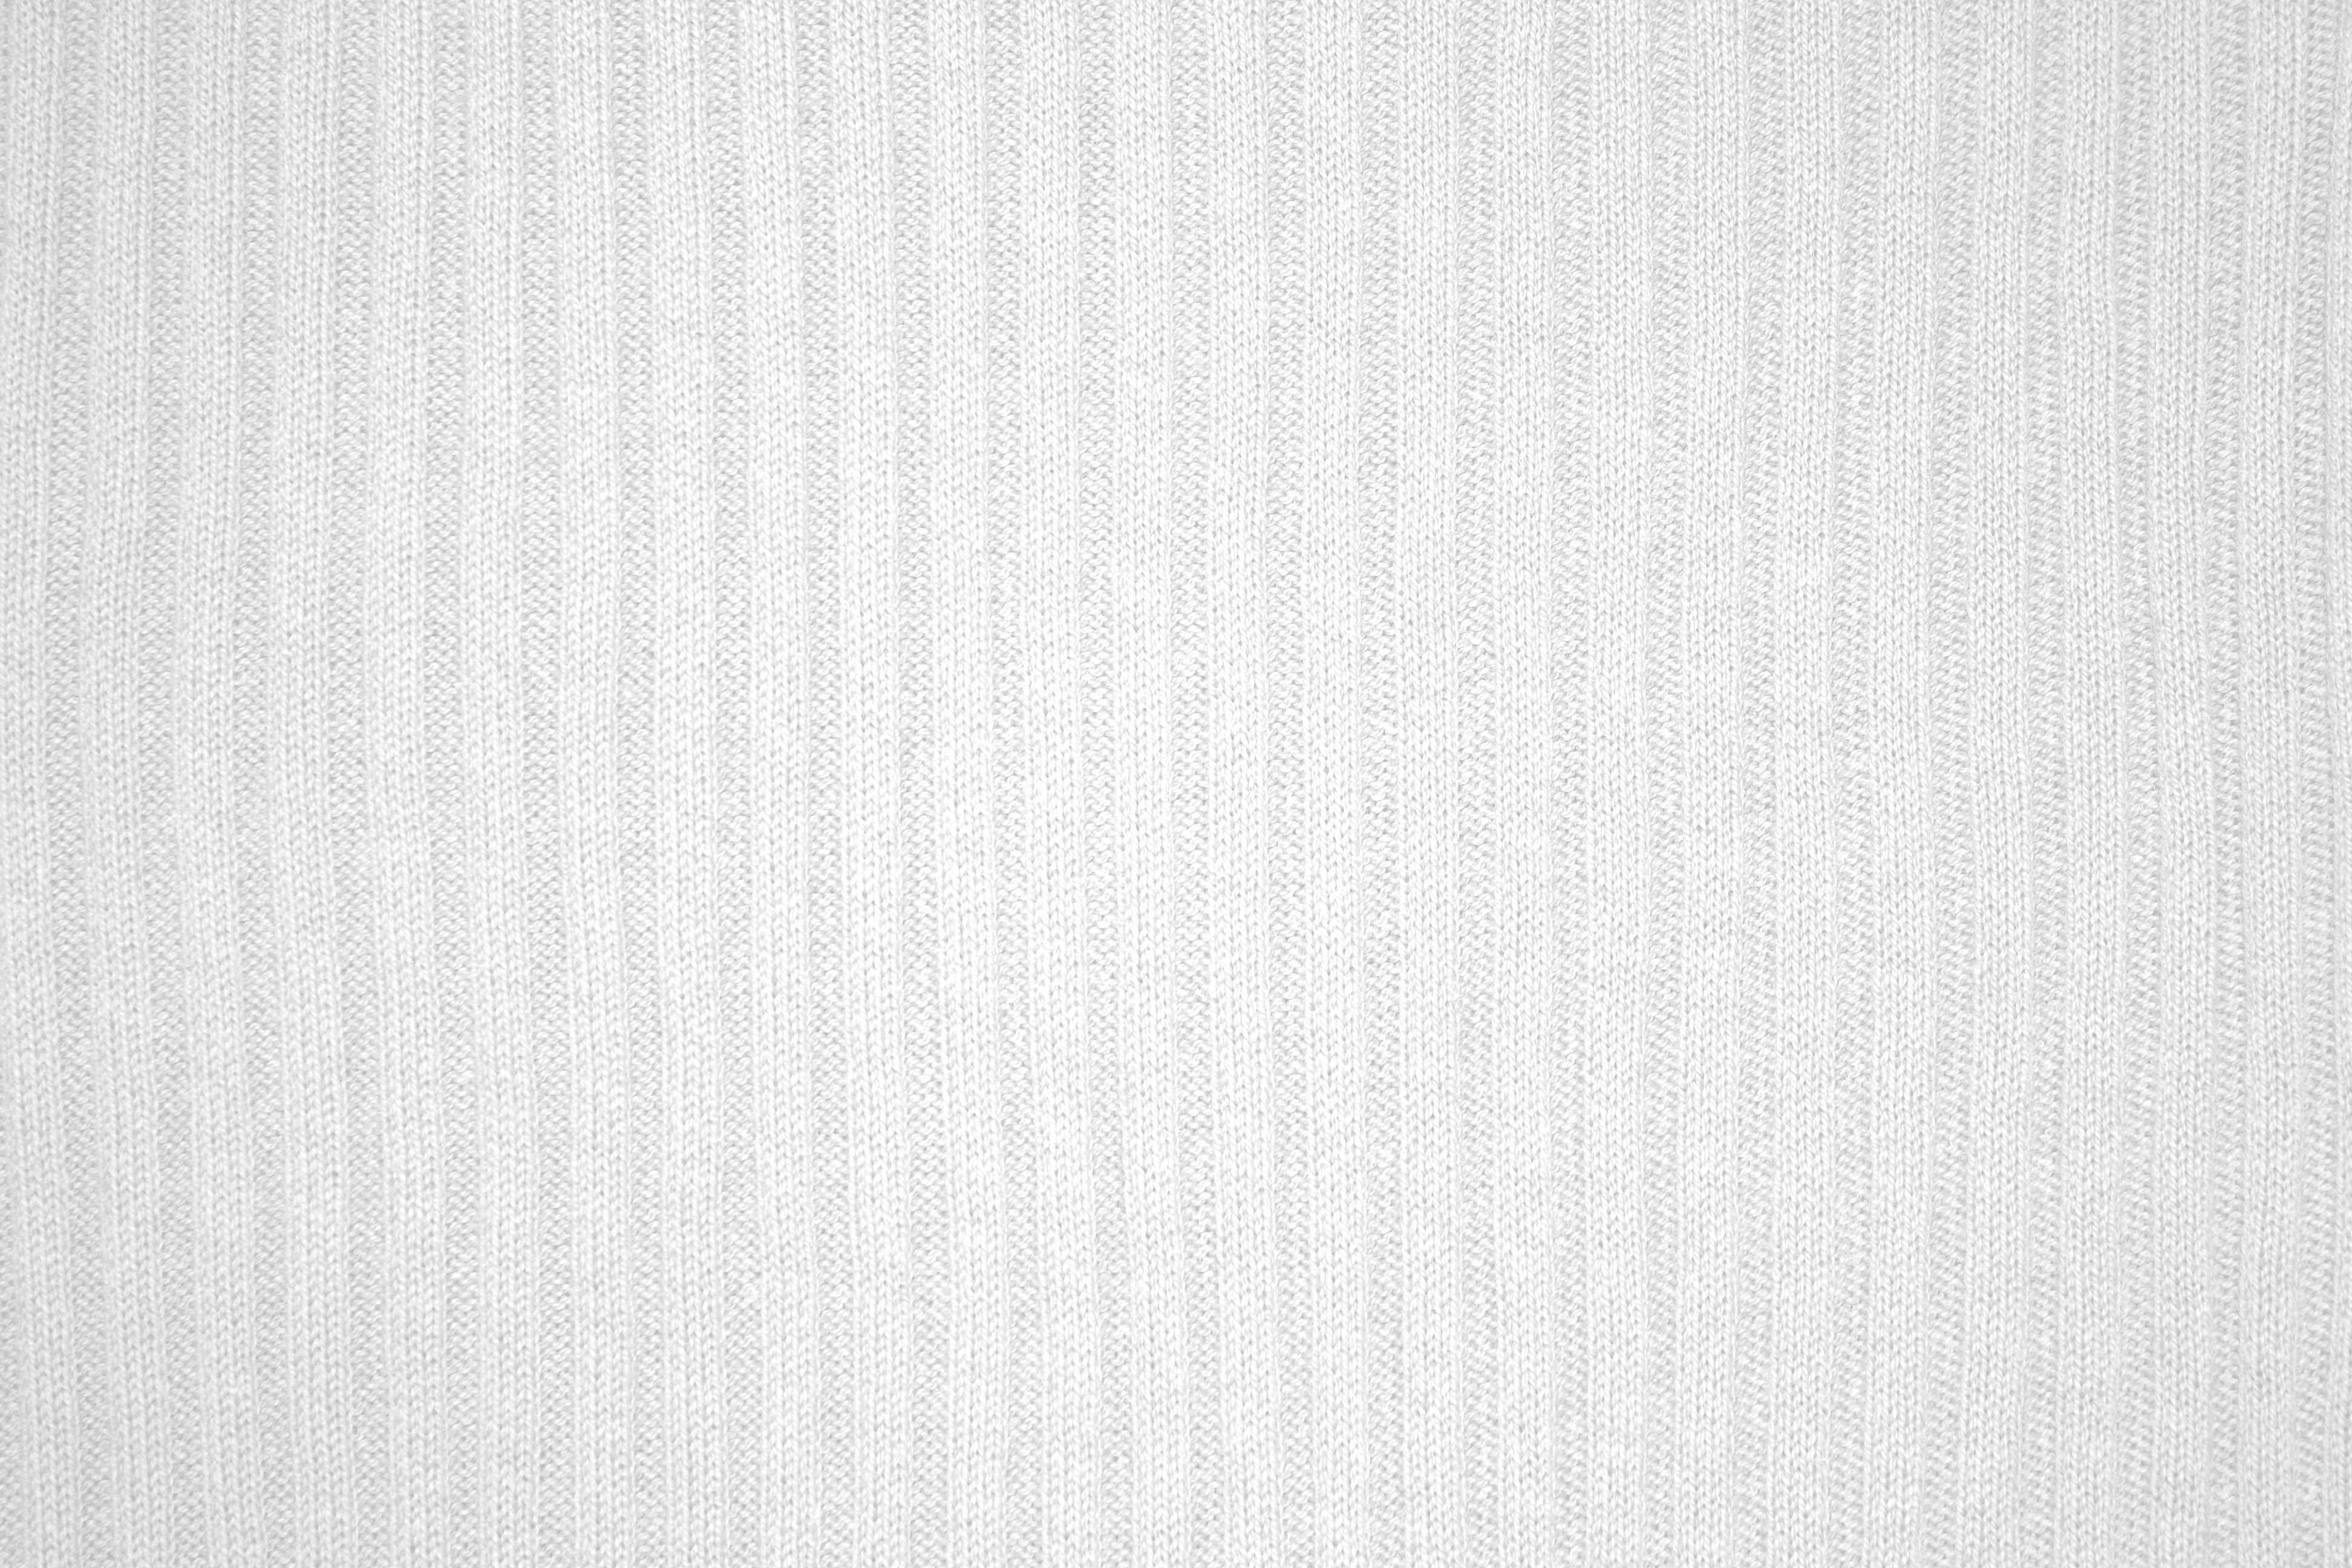 White Ribbed Knit Fabric Texture Picture Photograph Photos